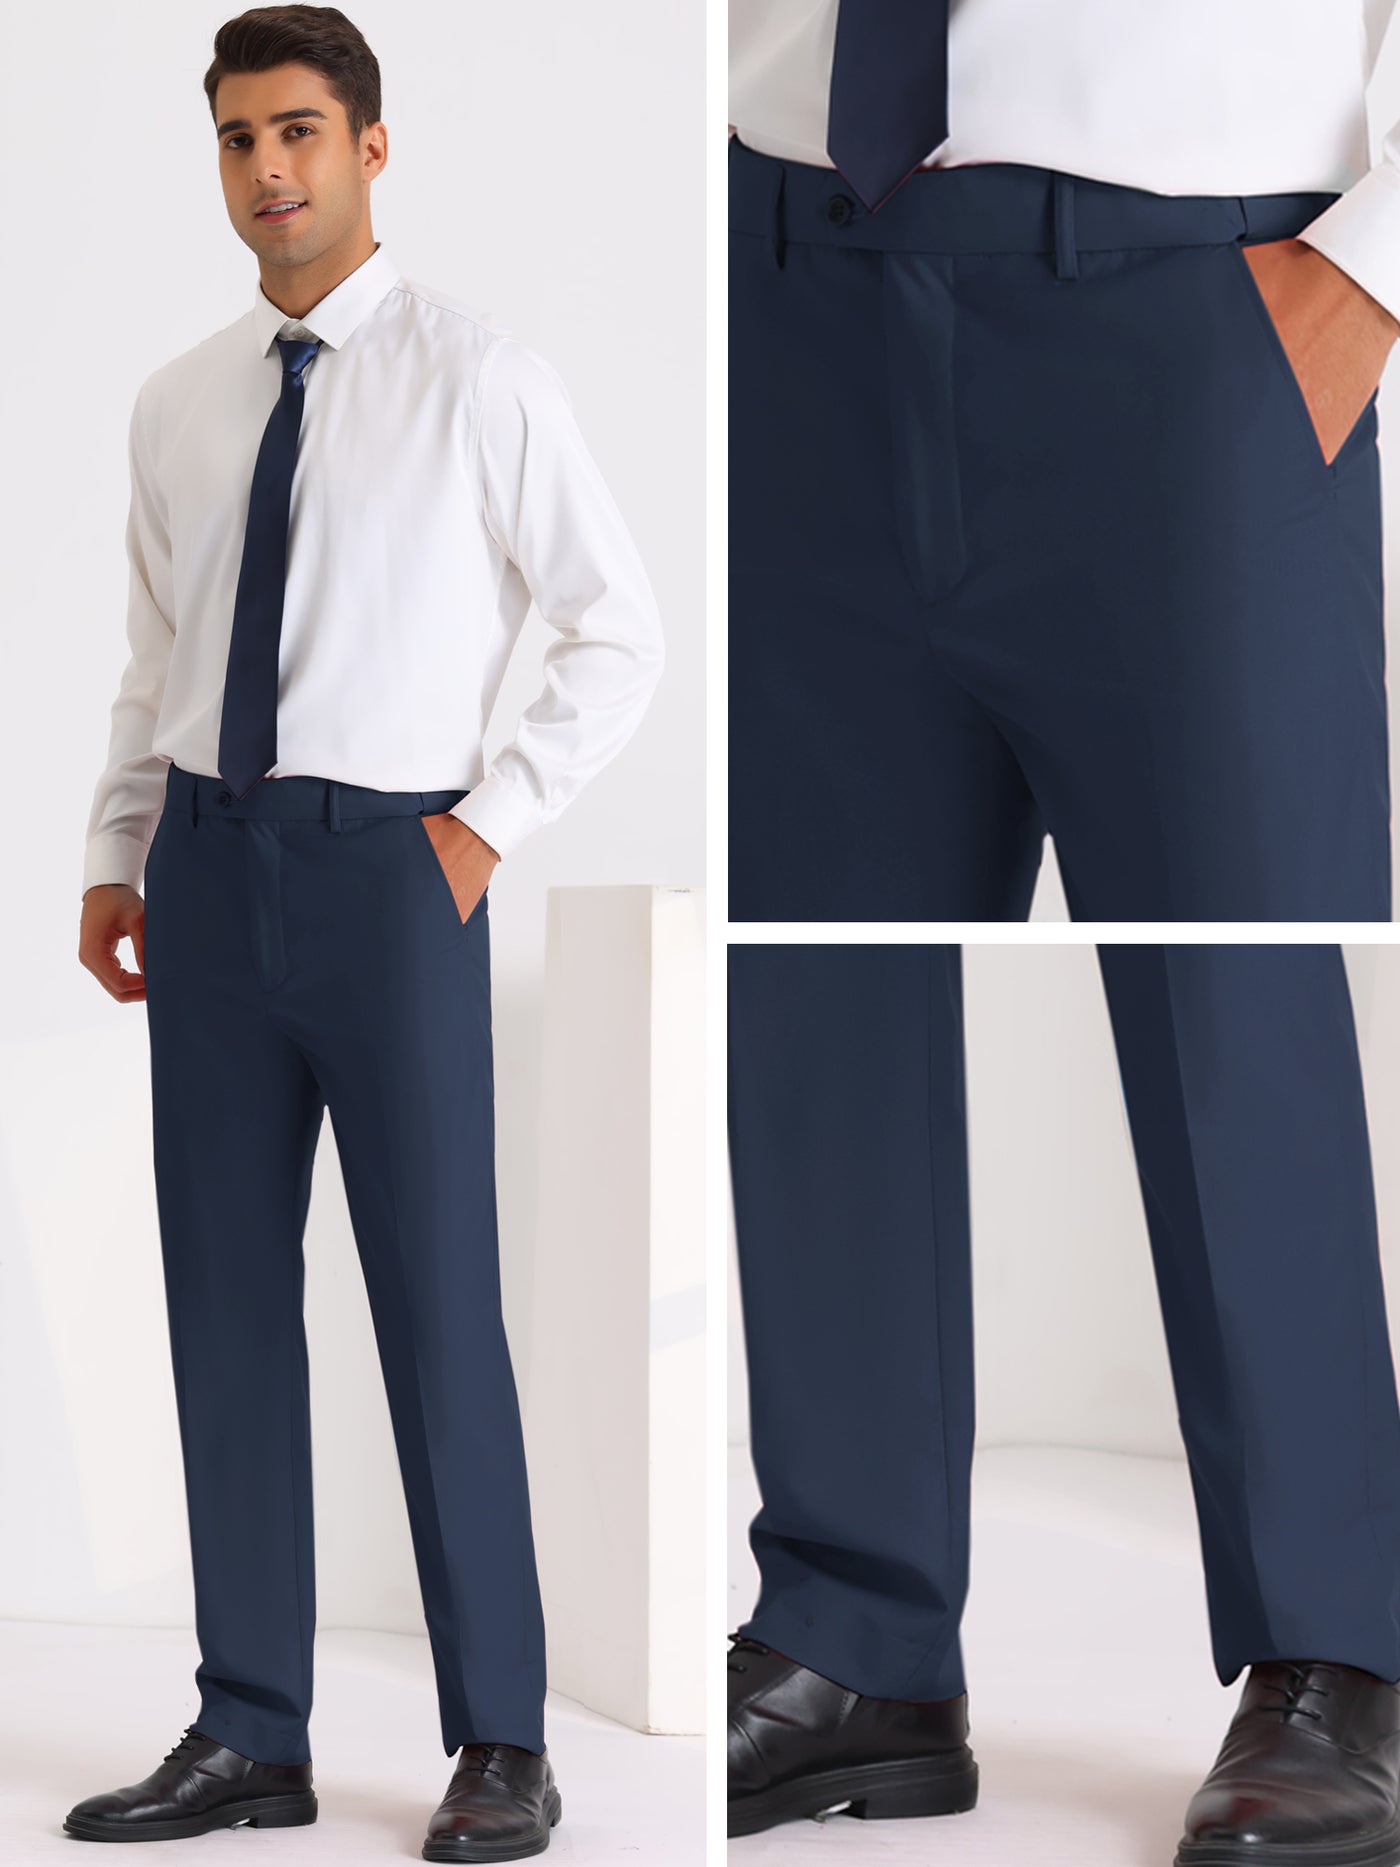 Bublédon Business Dress Pants for Men's Skinny Flat Front Wedding Chino Trousers